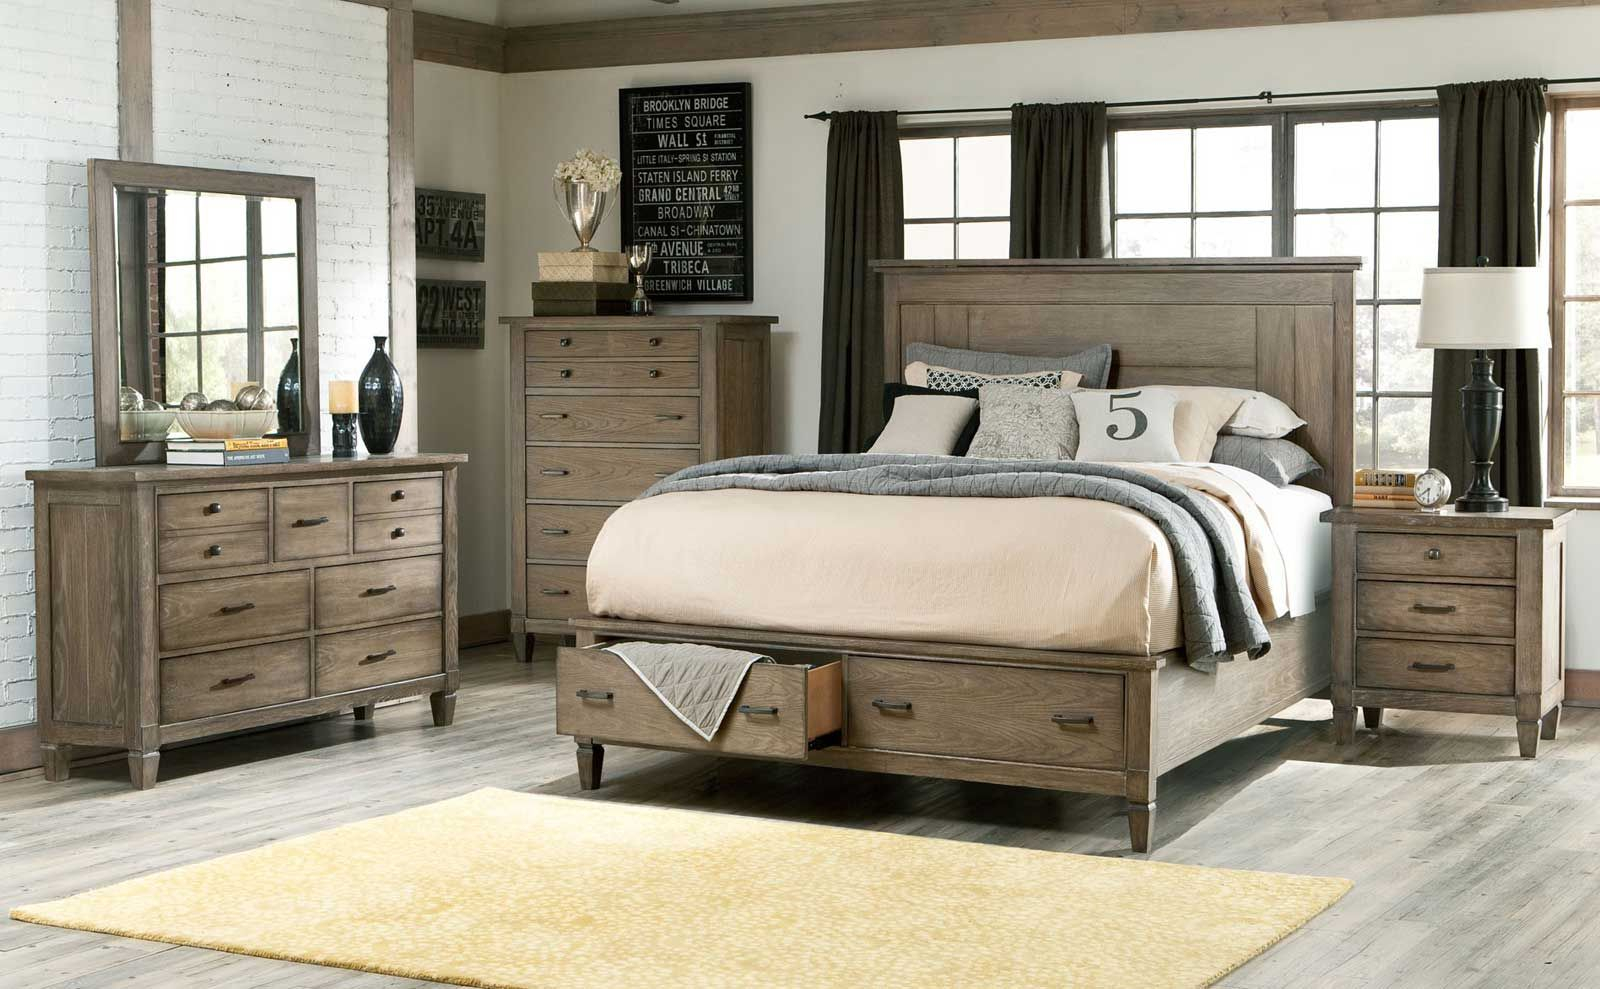 Image Result For Wood King Size Bedroom Sets Home Design Rustic within proportions 1600 X 989